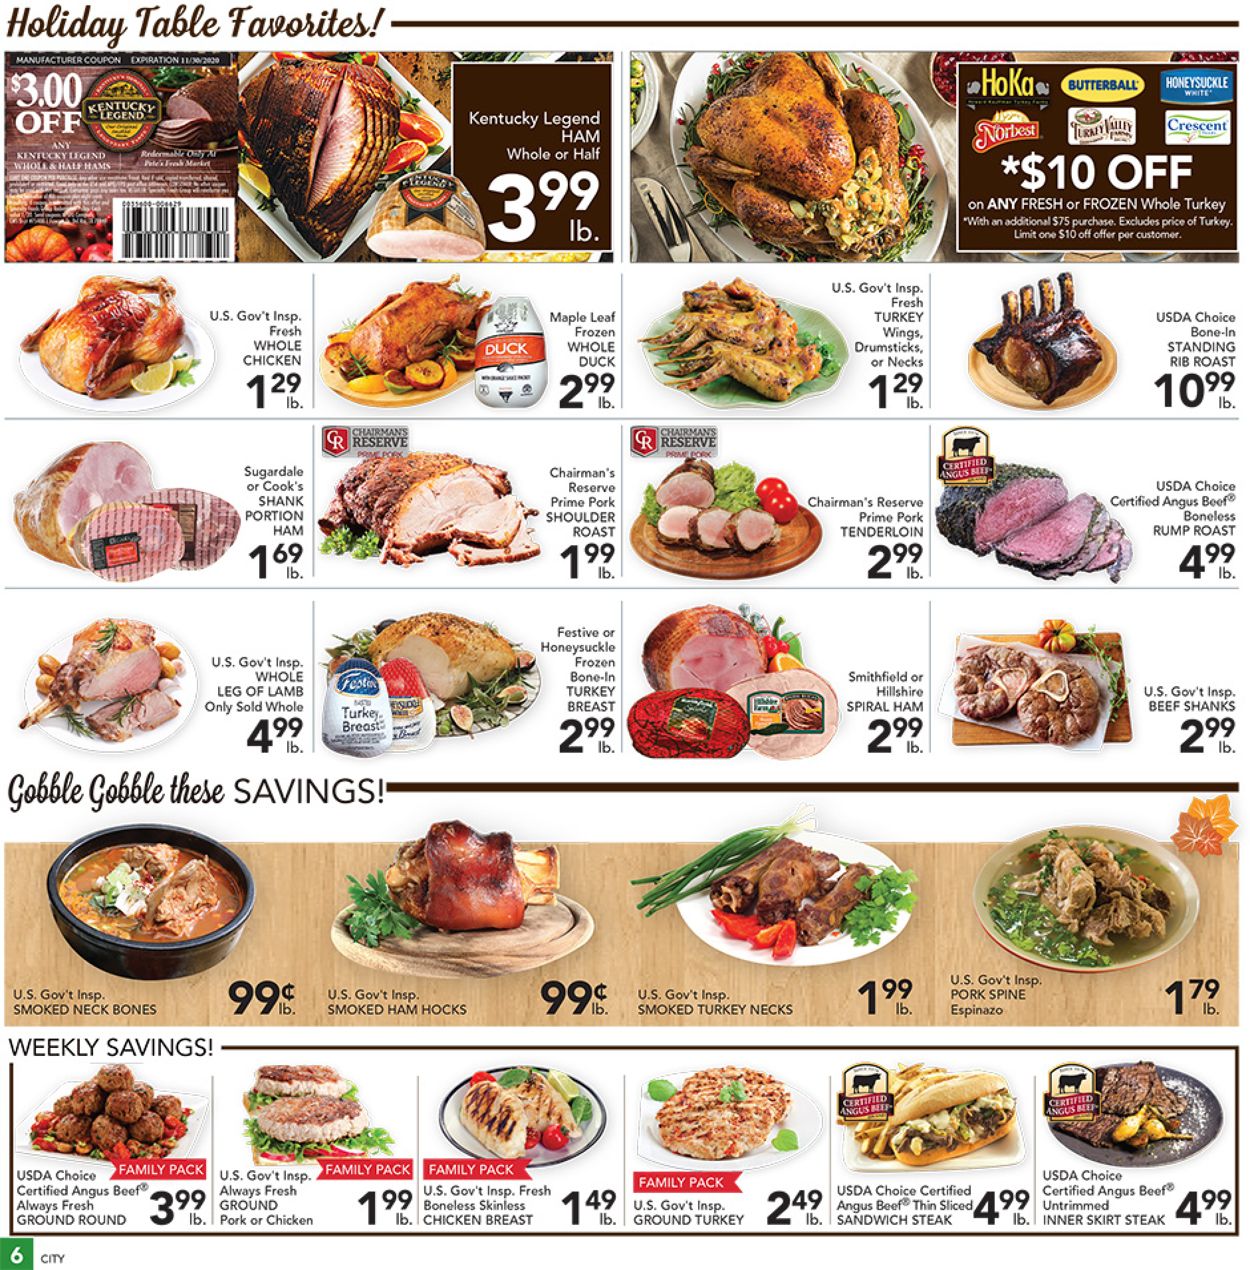 Pete's Fresh Market Thanksgiving ad 2020 Weekly Ad Circular - valid 11/18-11/26/2020 (Page 6)